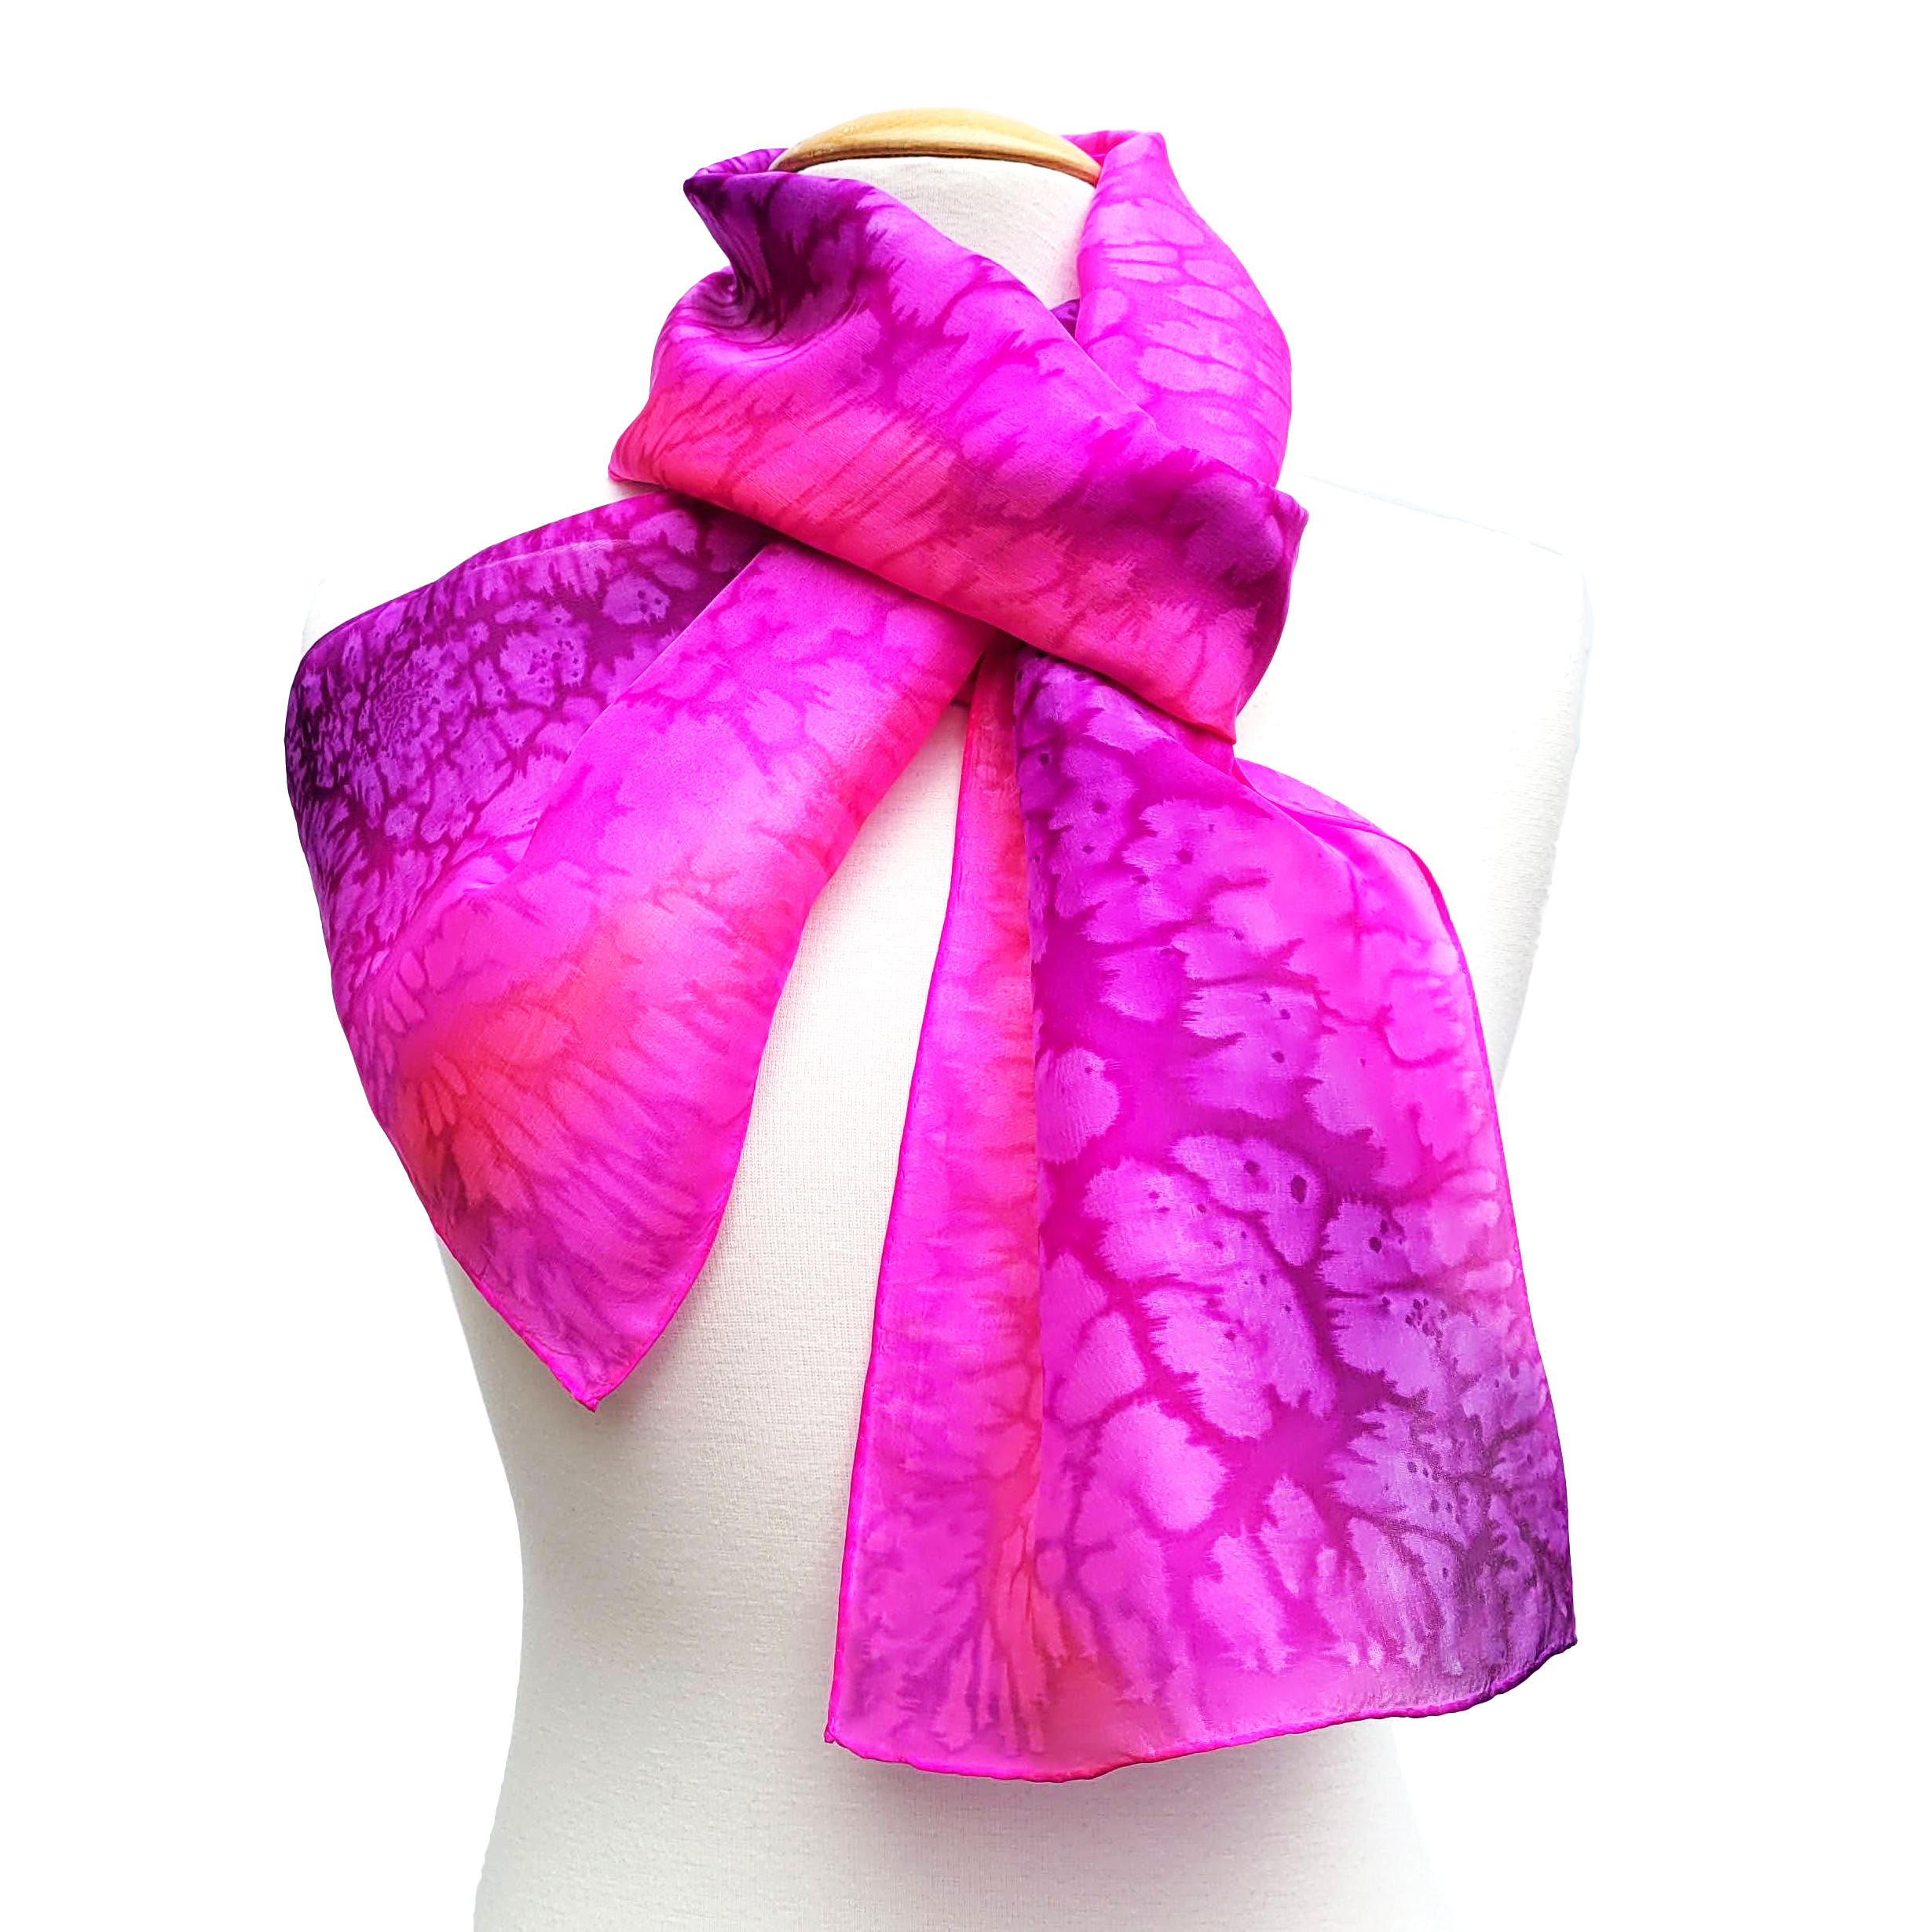 pure silk long scarf tie dyed pink and purple color handmade by Lynne Kiel